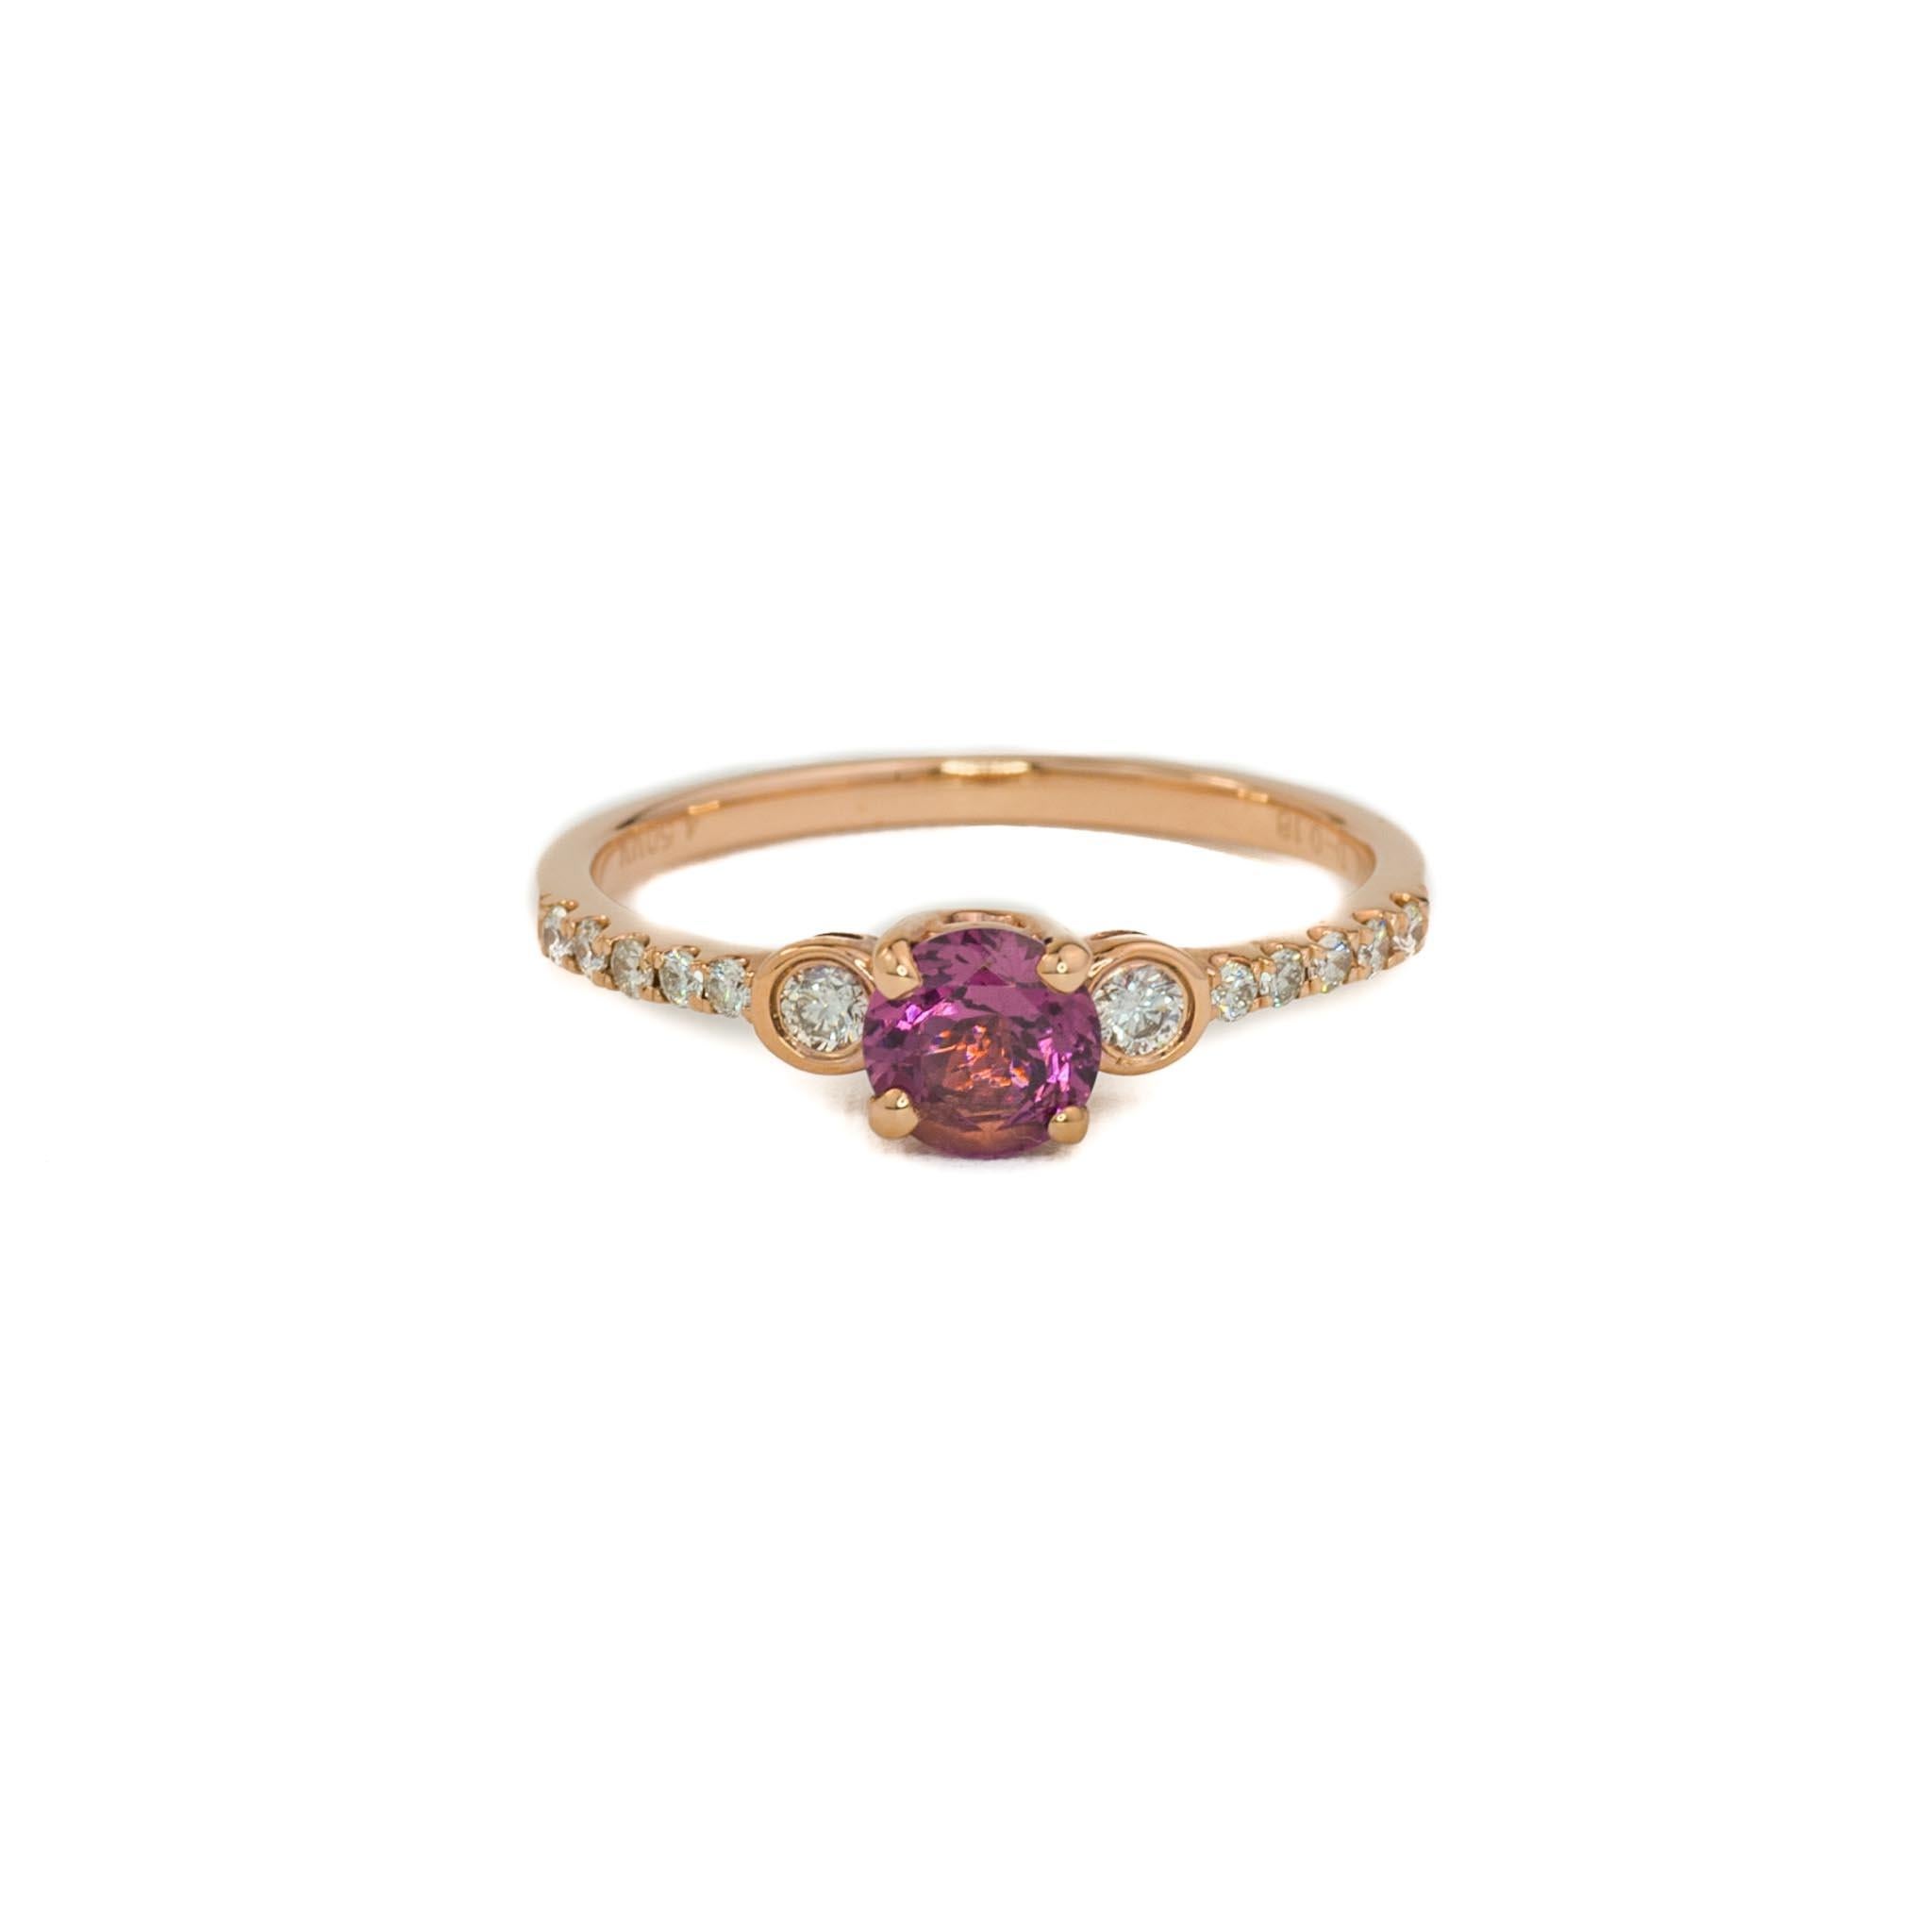 Treat yourself to the perfect ring for your January birthday with this stunning bezel set diamonds and rhodolite garnet ring. Crafted from 14K rose gold, the conflict free diamonds radiate elegance and sophistication. The center stone is a vibrant